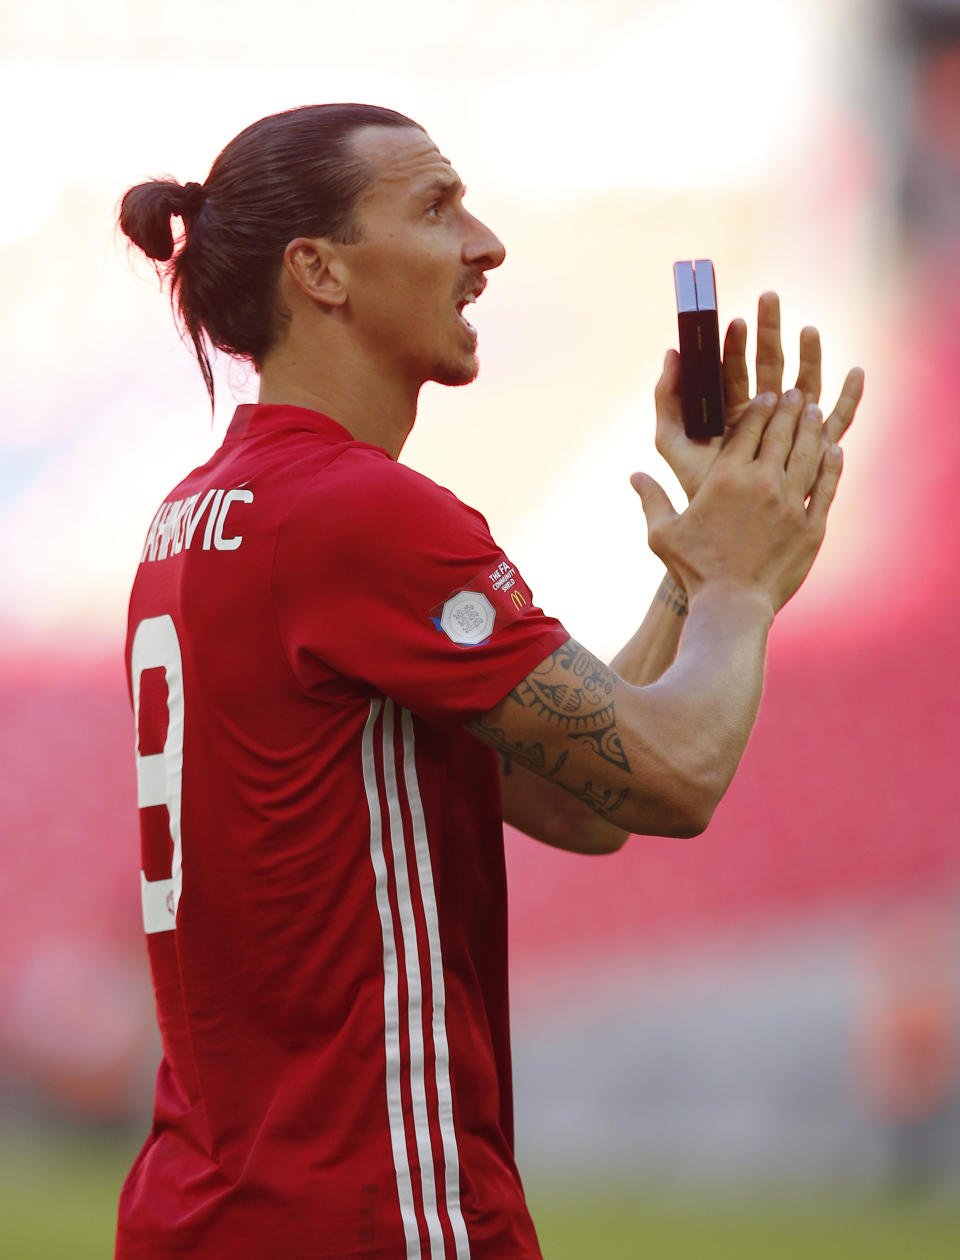 Football Soccer Britain - Leicester City v Manchester United - FA Community Shield - Wembley Stadium - 7/8/16 Manchester United's Zlatan Ibrahimovic applauds fans after winning the FA Community Shield Action Images via Reuters / Andrew Couldridge Livepic EDITORIAL USE ONLY. No use with unauthorized audio, video, data, fixture lists, club/league logos or "live" services. Online in-match use limited to 45 images, no video emulation. No use in betting, games or single club/league/player publications. Please contact your account representative for further details.